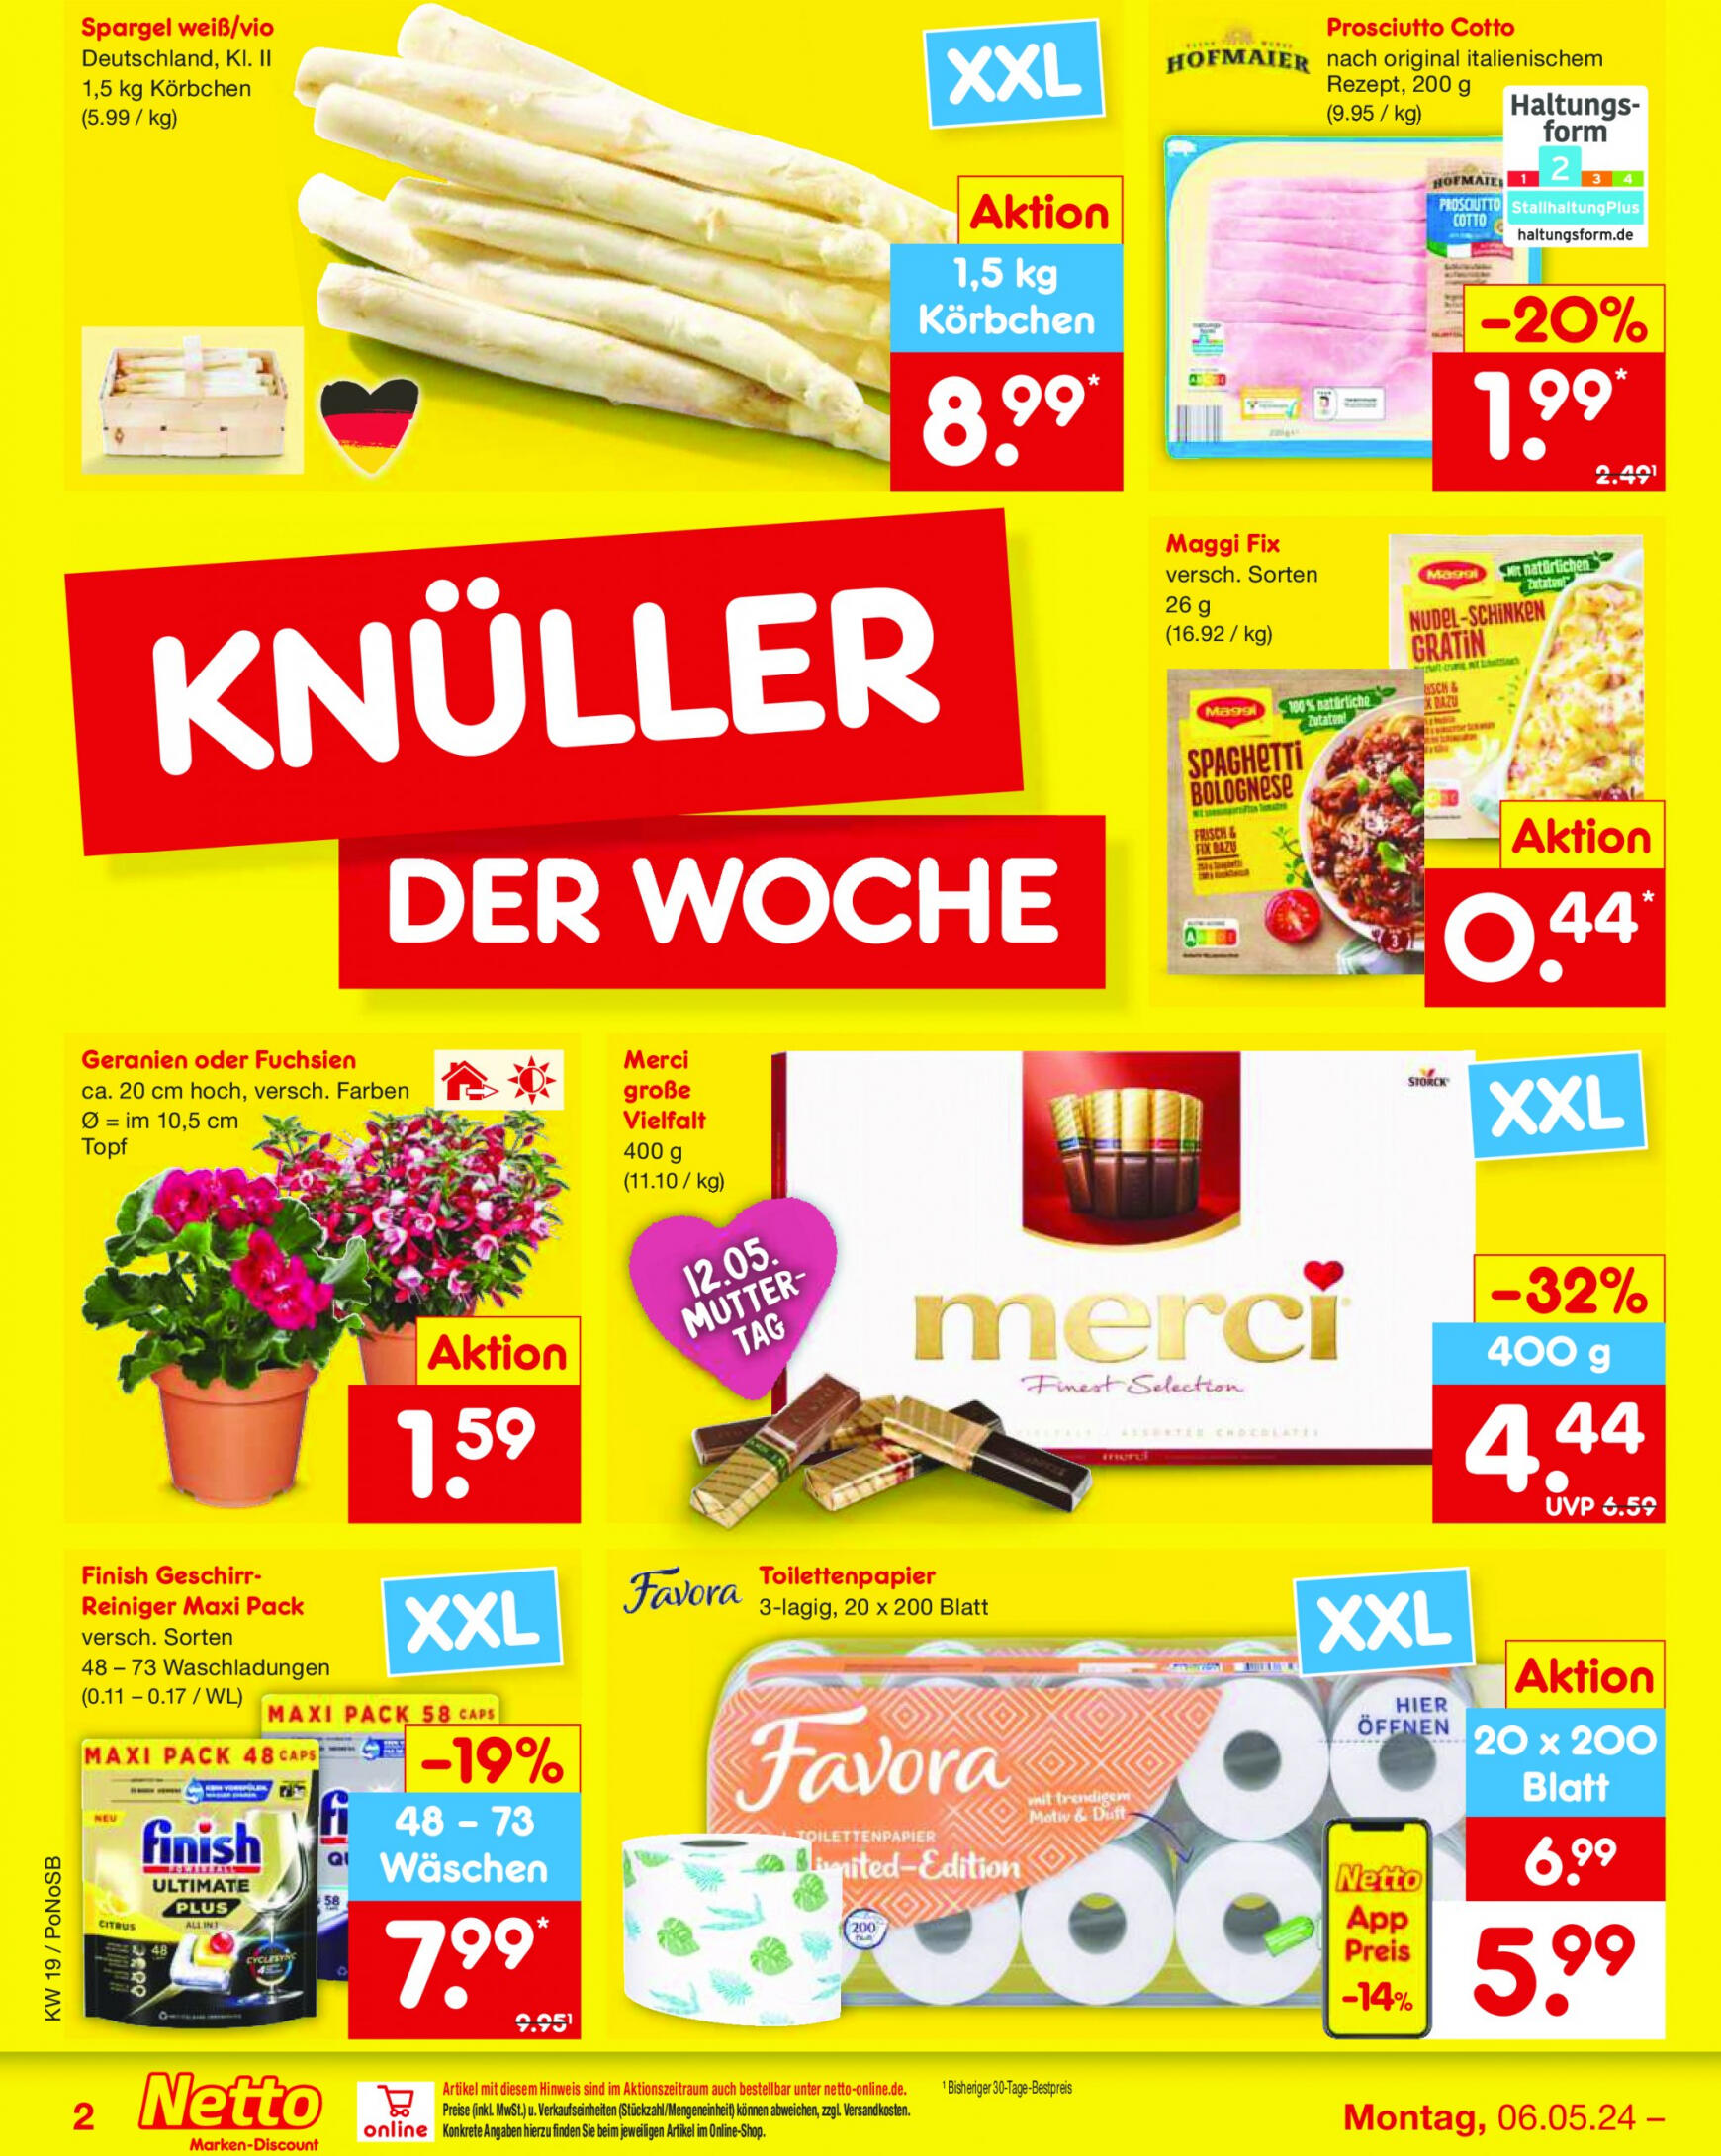 netto - Flyer Netto aktuell 06.05. - 11.05. - page: 2